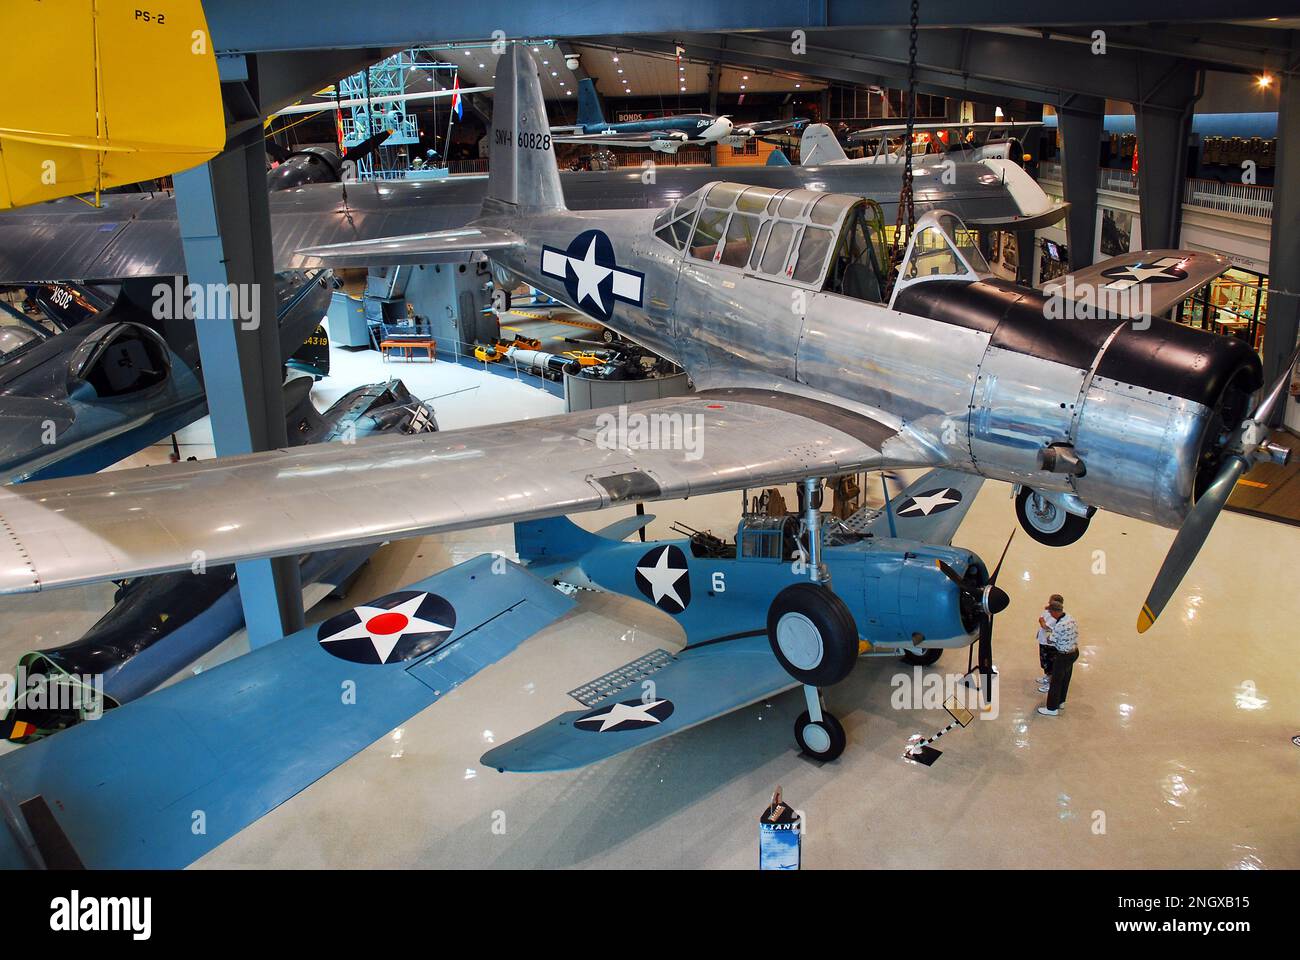 World War II era planes are on display at an aviation museum in Pensacola, Florida Stock Photo